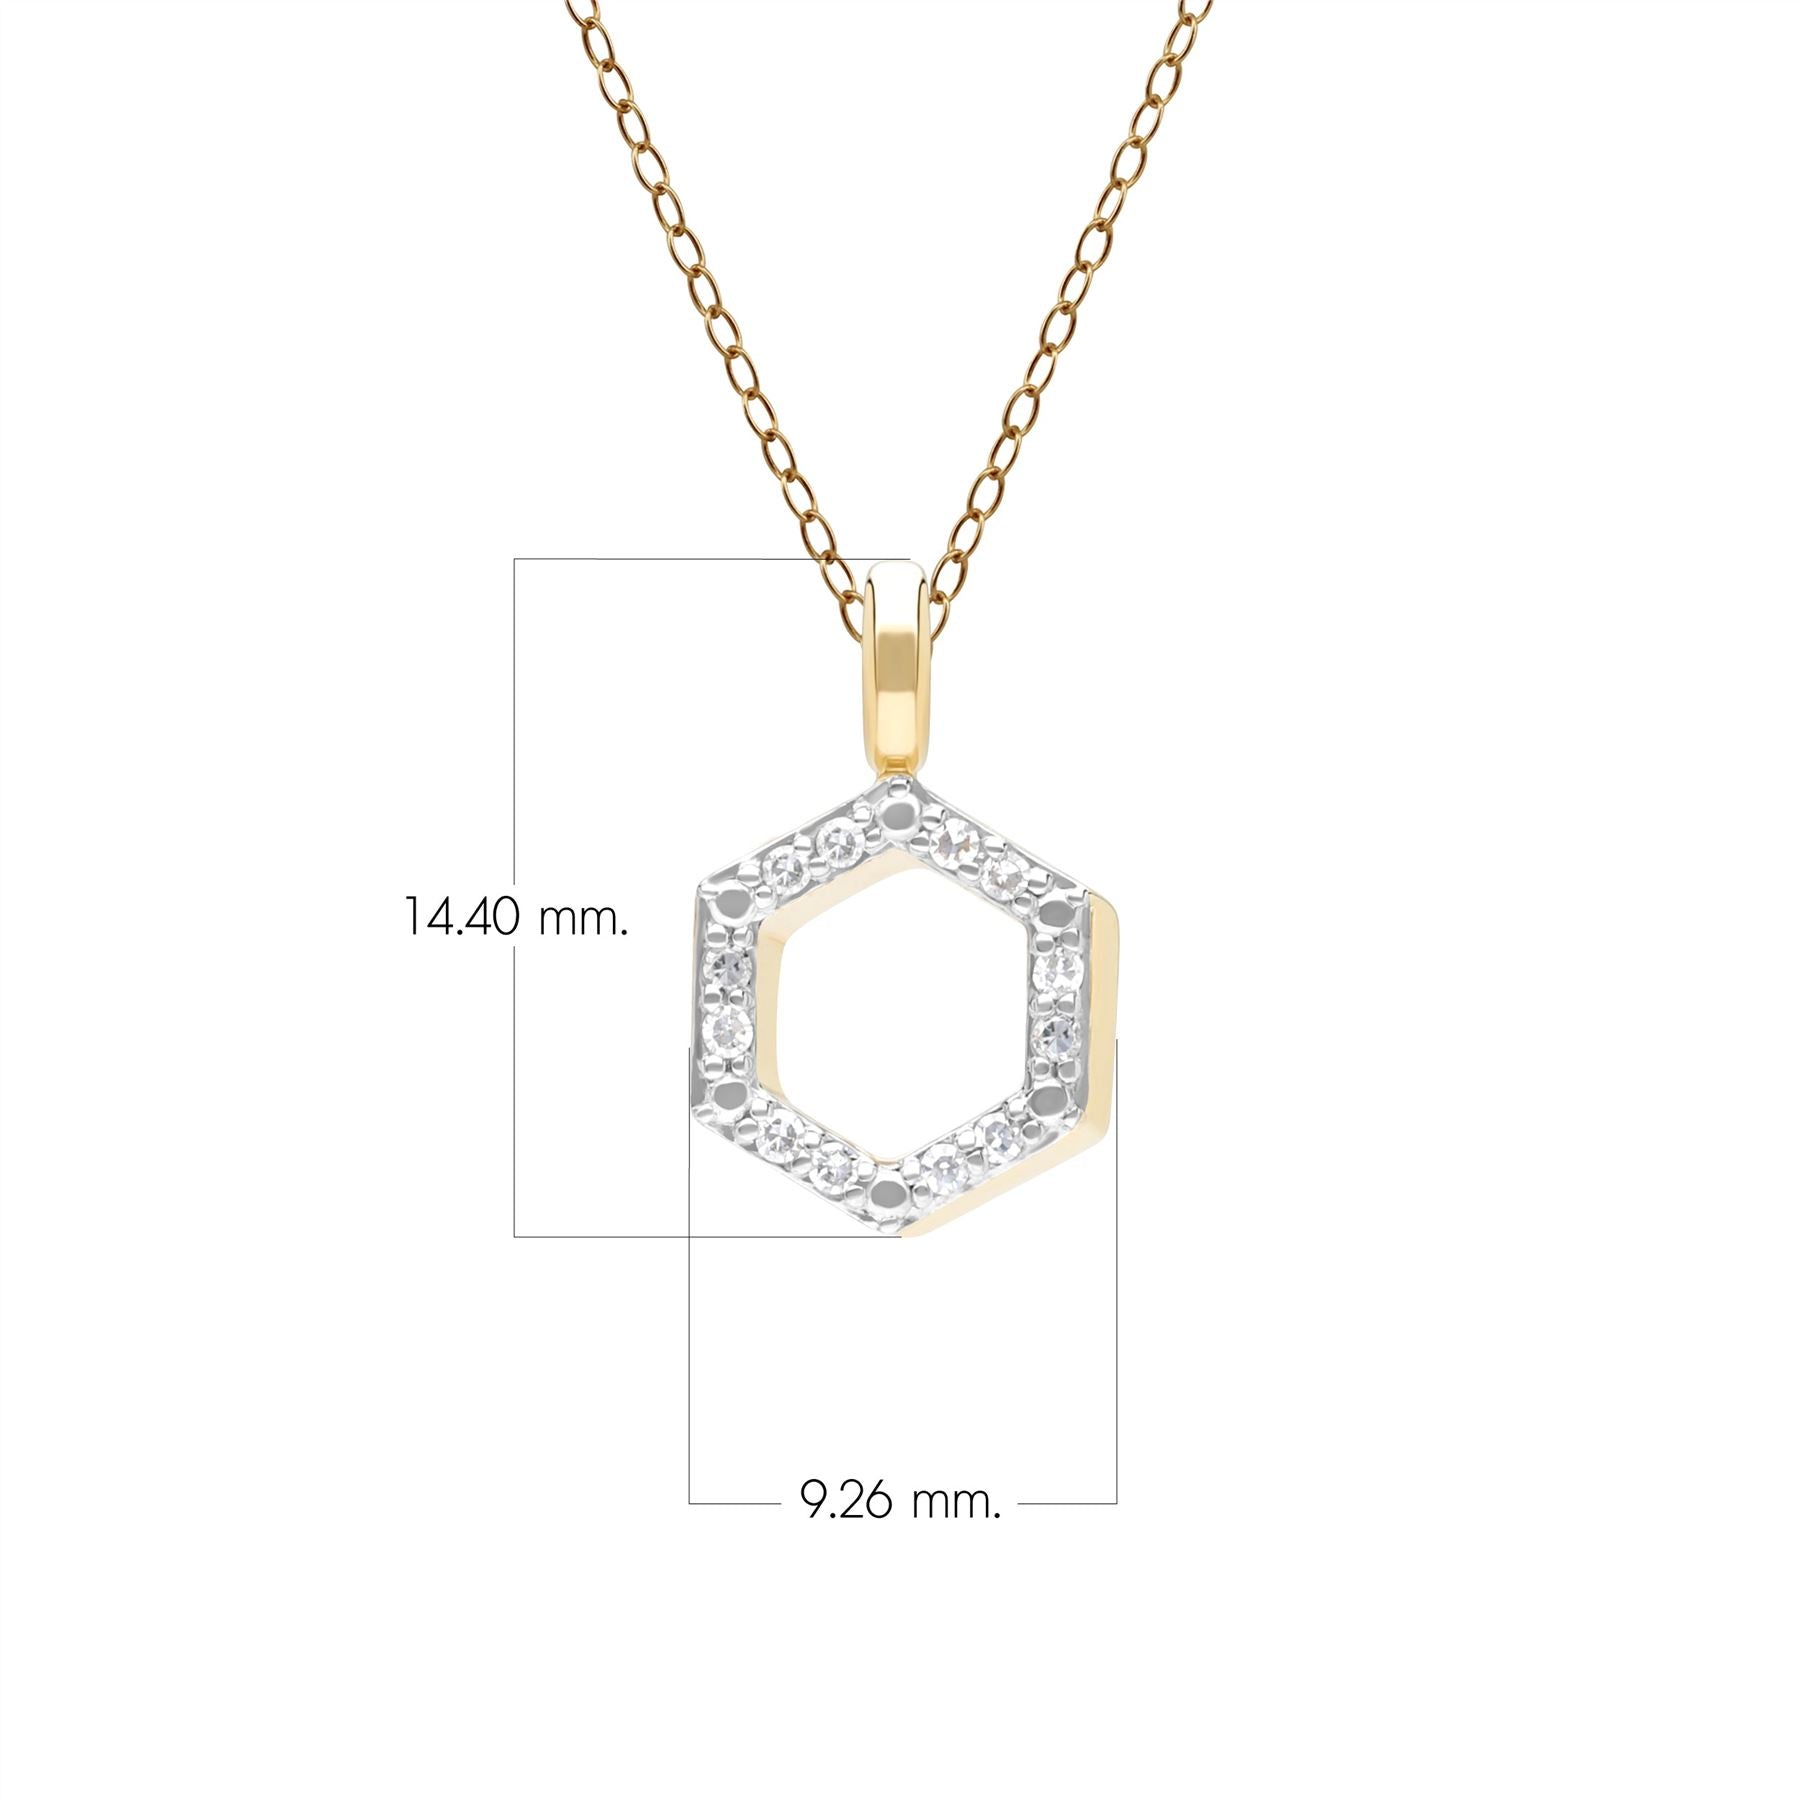 Geometric Hex Diamond Pendant Necklace in 9ct Yellow Gold Dimensions 